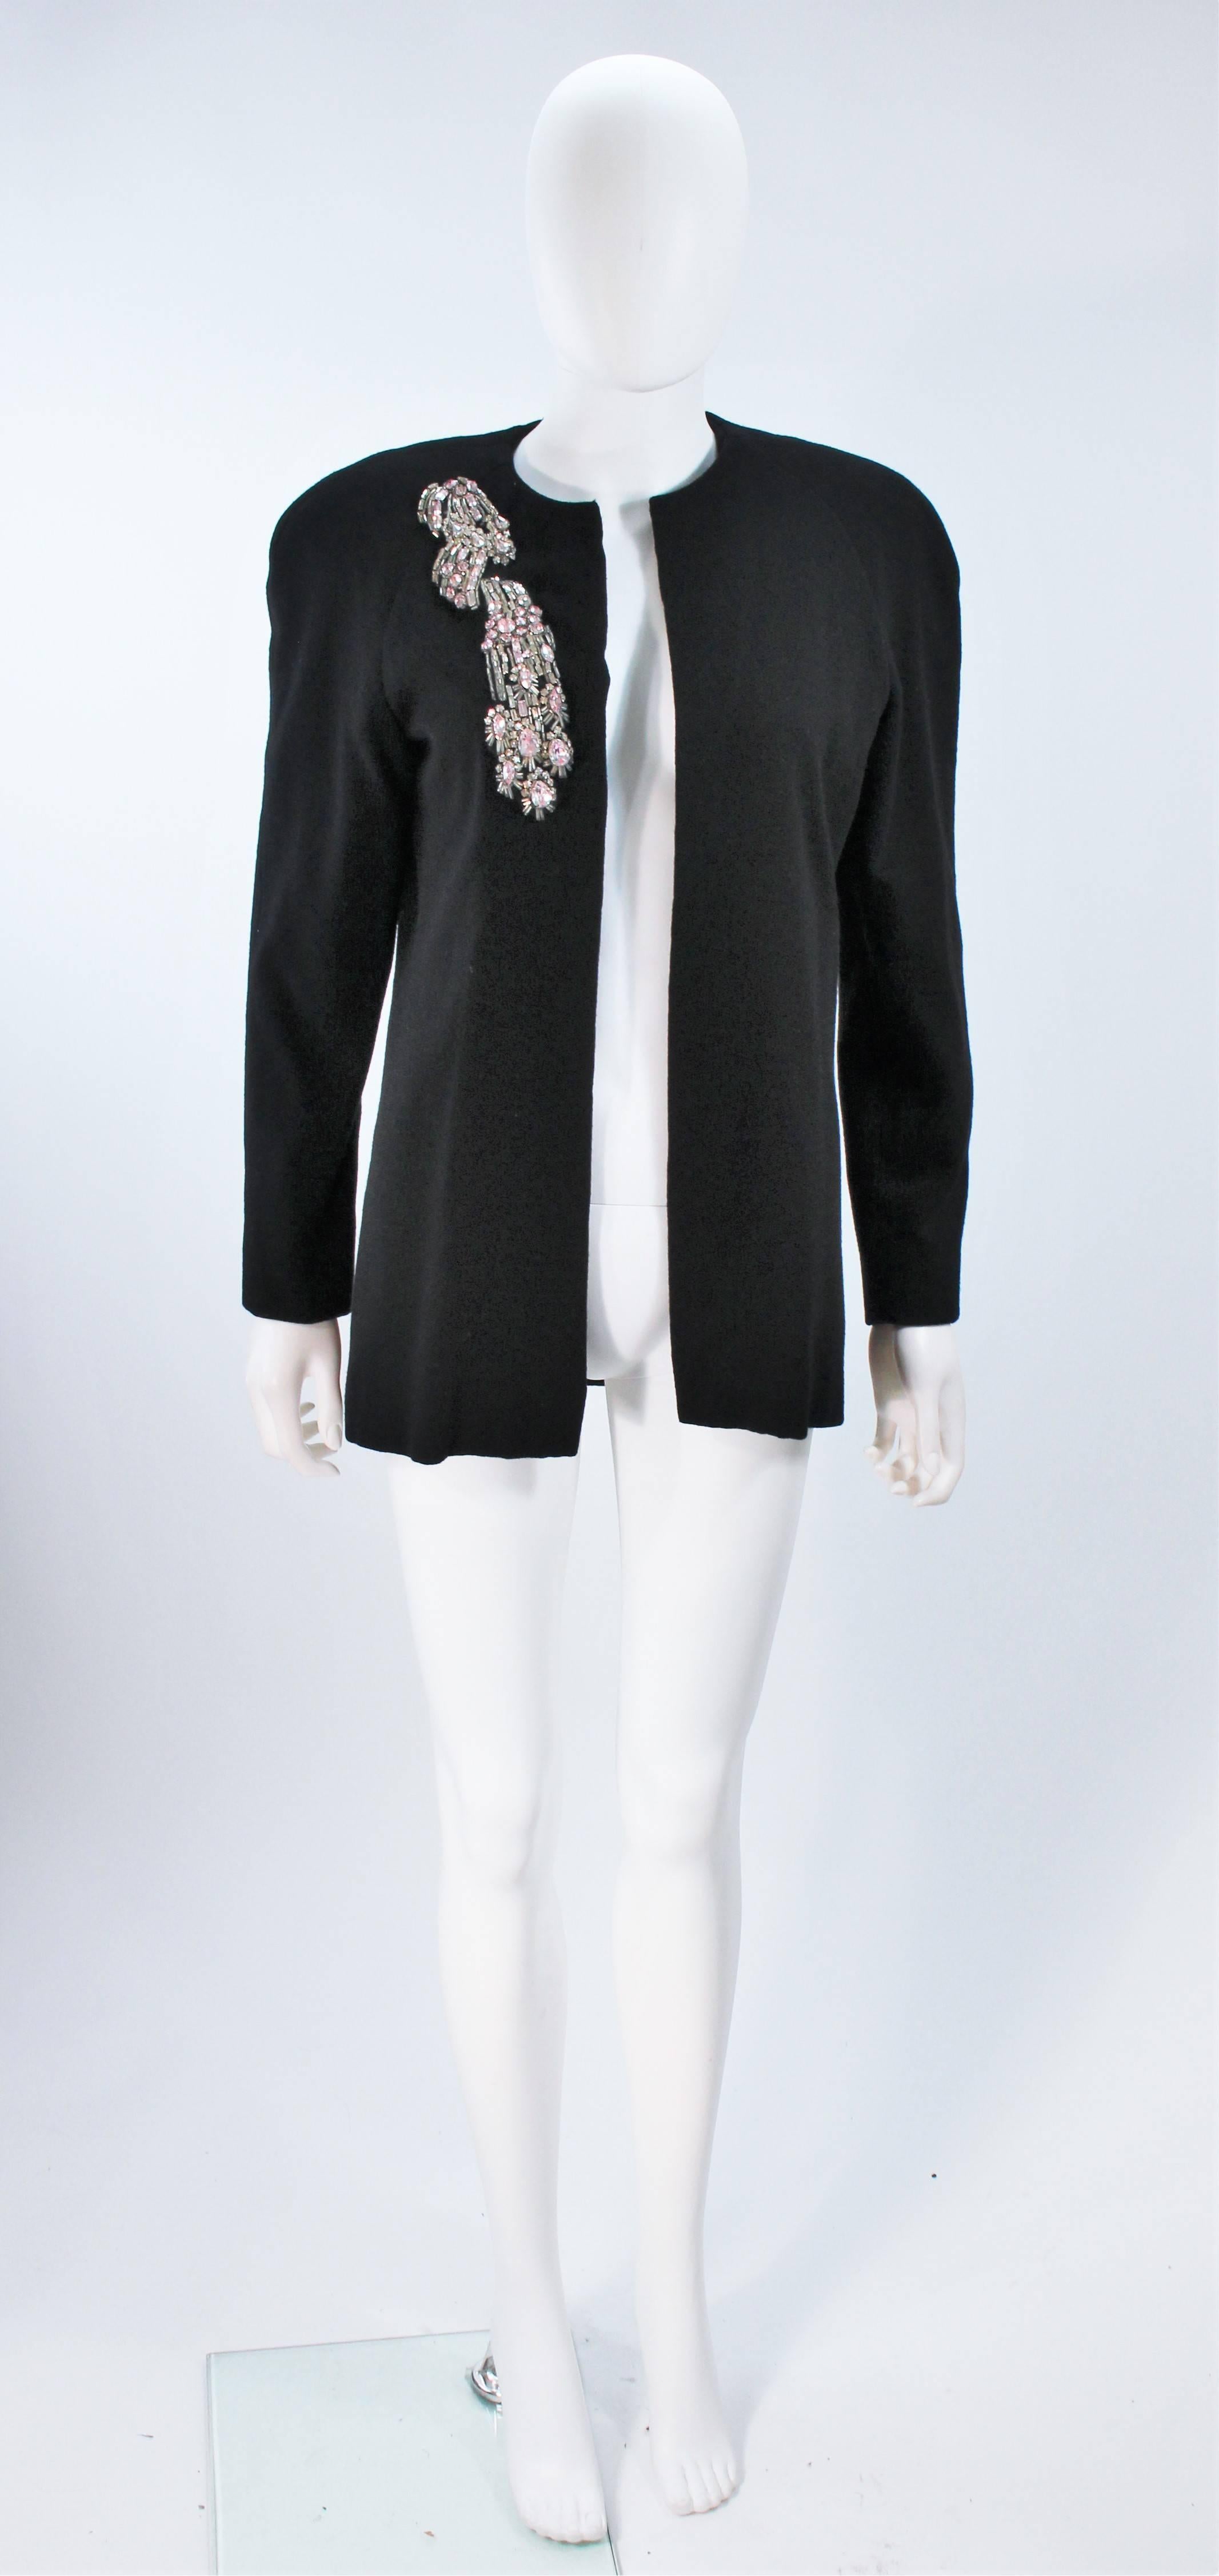  This Carolyn Roehm jacket is composed of a black stretch wool with a white and pink rhinestone applique. Features an open style front. In excellent vintage condition. 

  **Please cross-reference measurements for personal accuracy. Size in